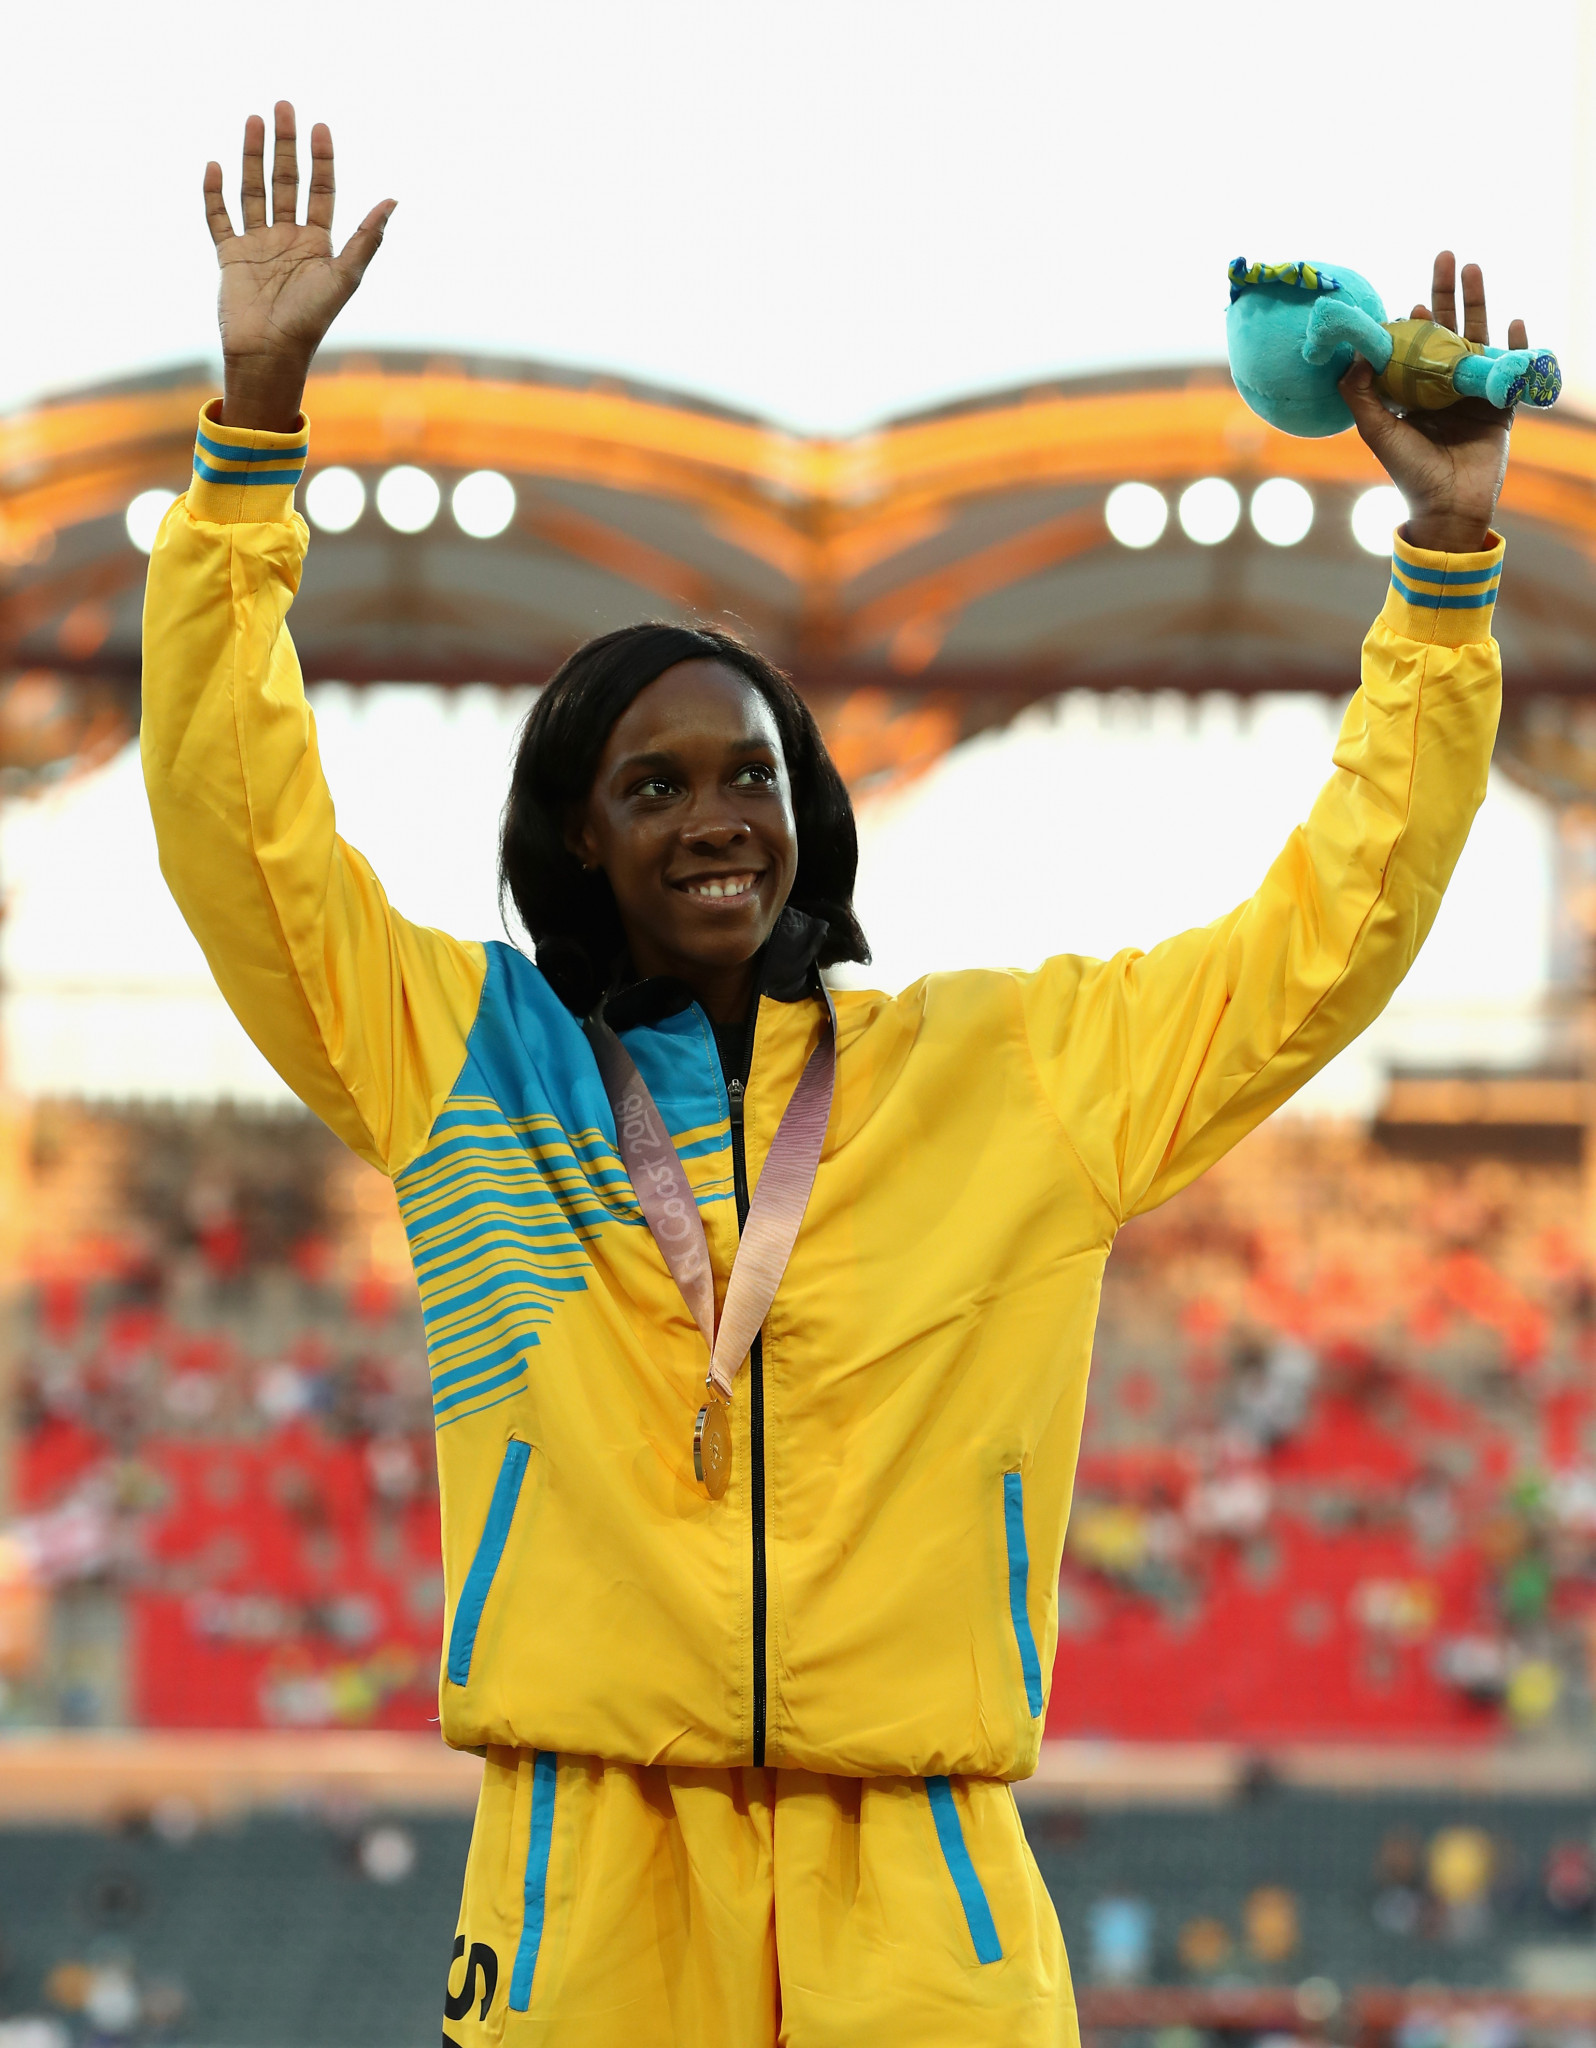 High jumper Spencer claims historic gold medal for St Lucia on day 10 of the Gold Coast 2018 Commonwealth Games